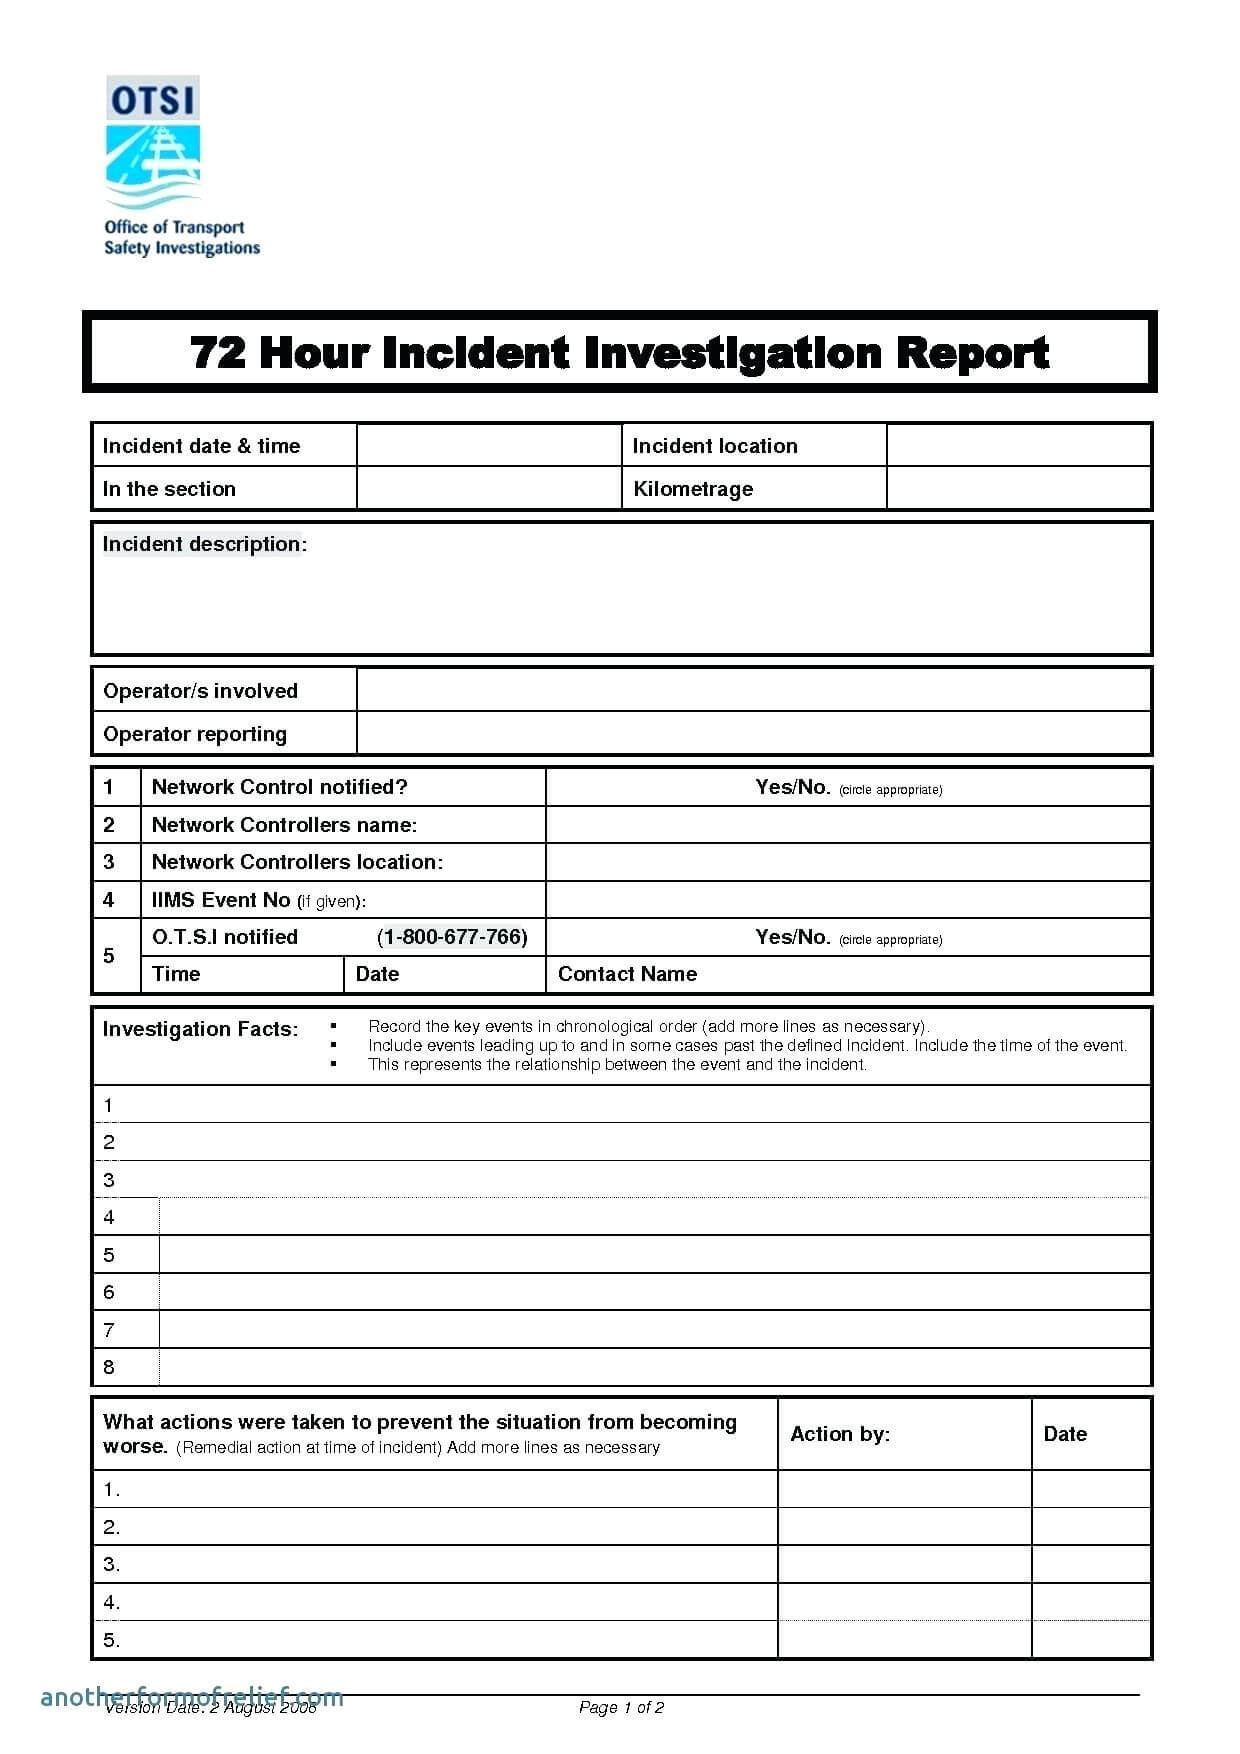 Crime Scene Report Sample 211805 Examples Images Of Template Pertaining To Crime Scene Report Template